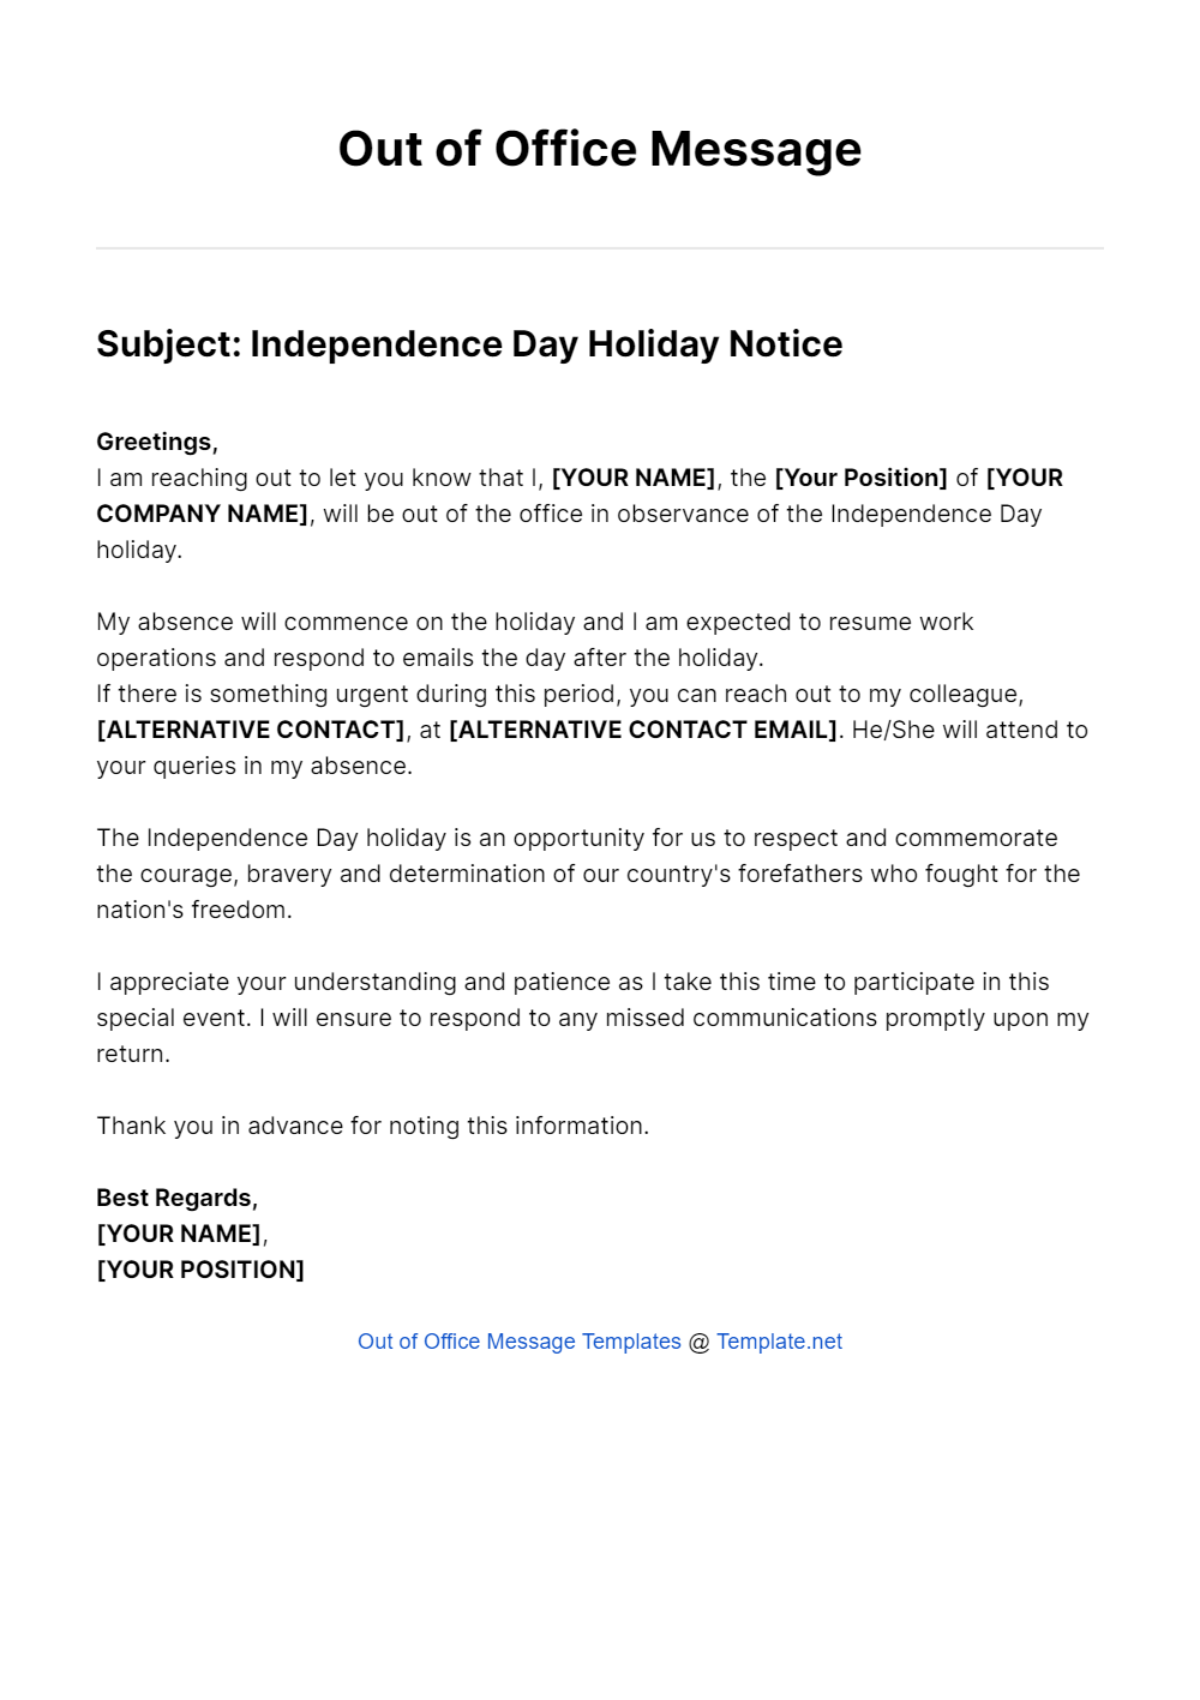 Independence Day Holiday Out Of Office Message Template